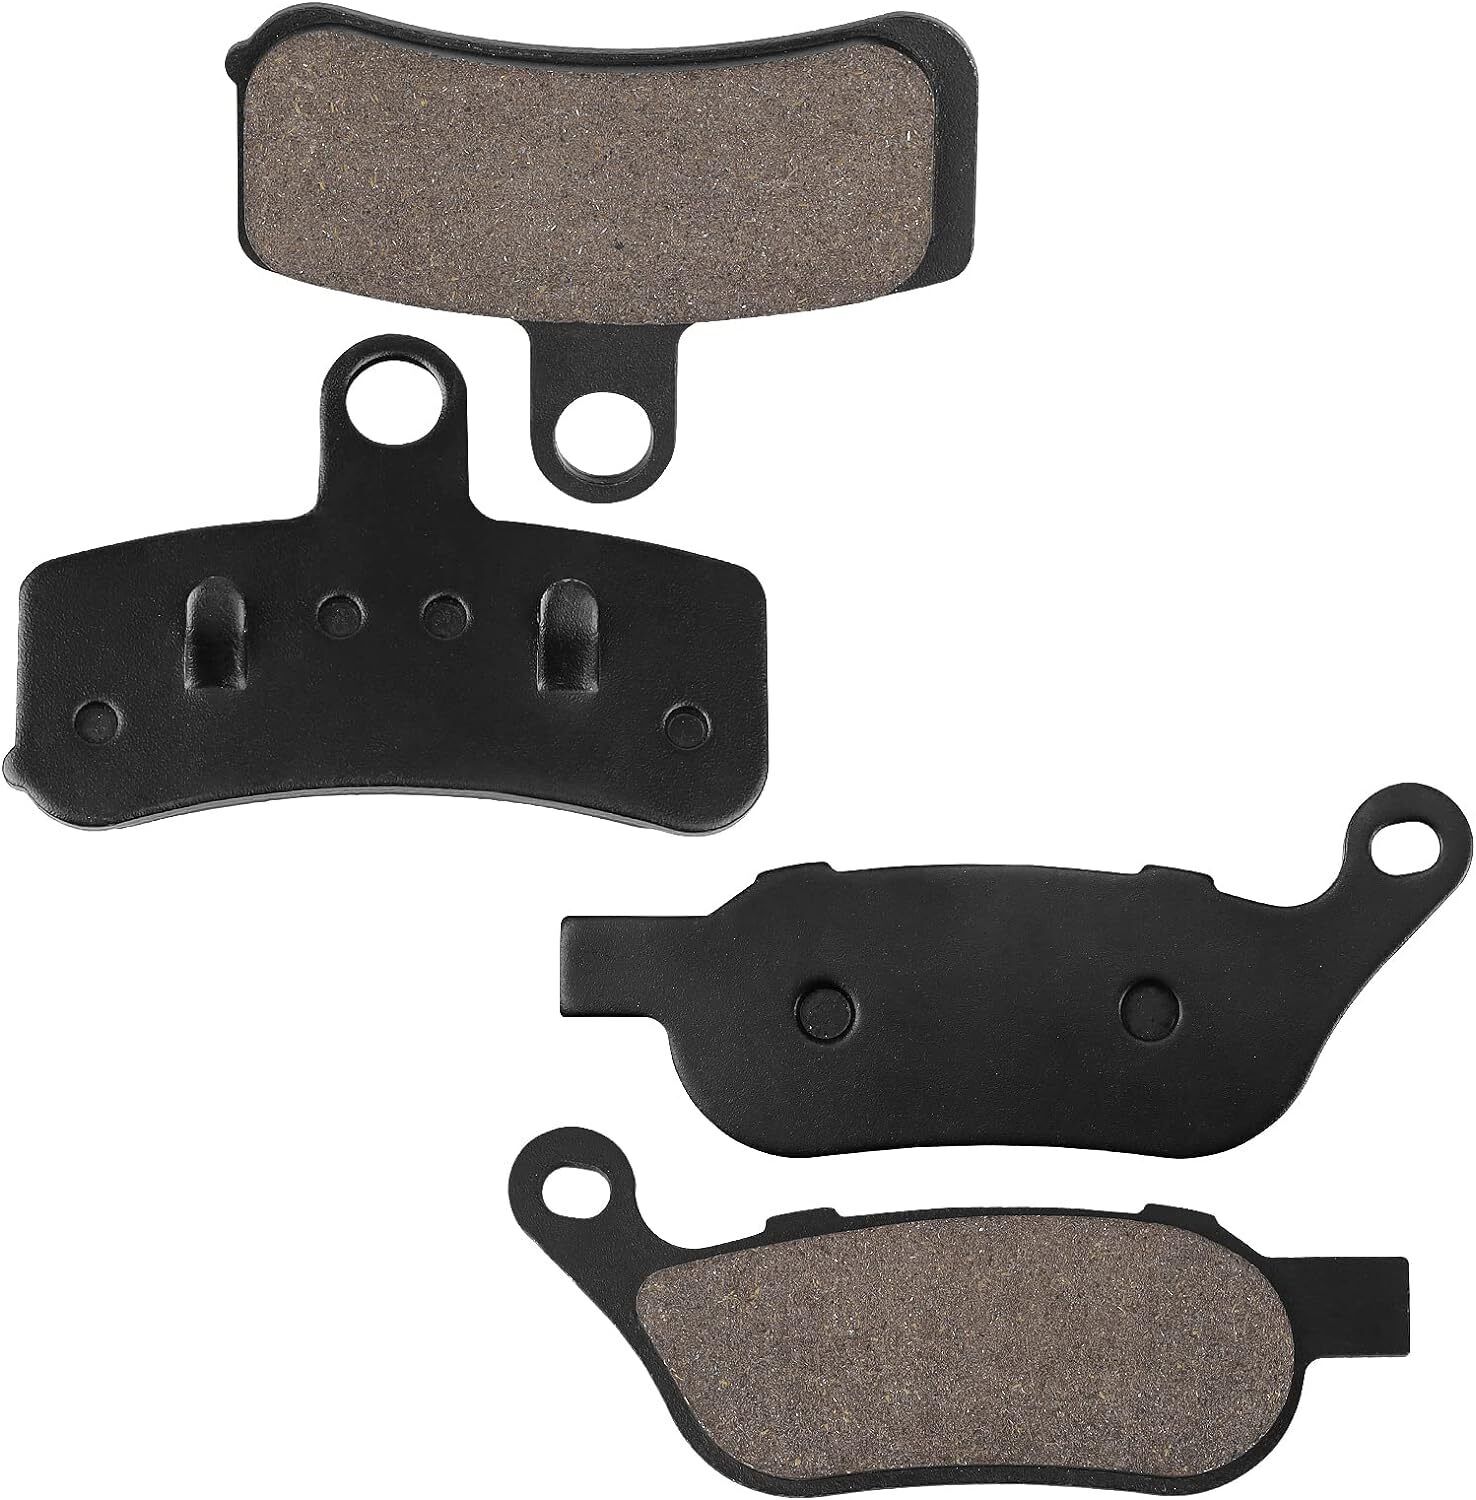 Front and Rear Brake Pads for Harley Davidson Fatboy Heritage Softail Classic